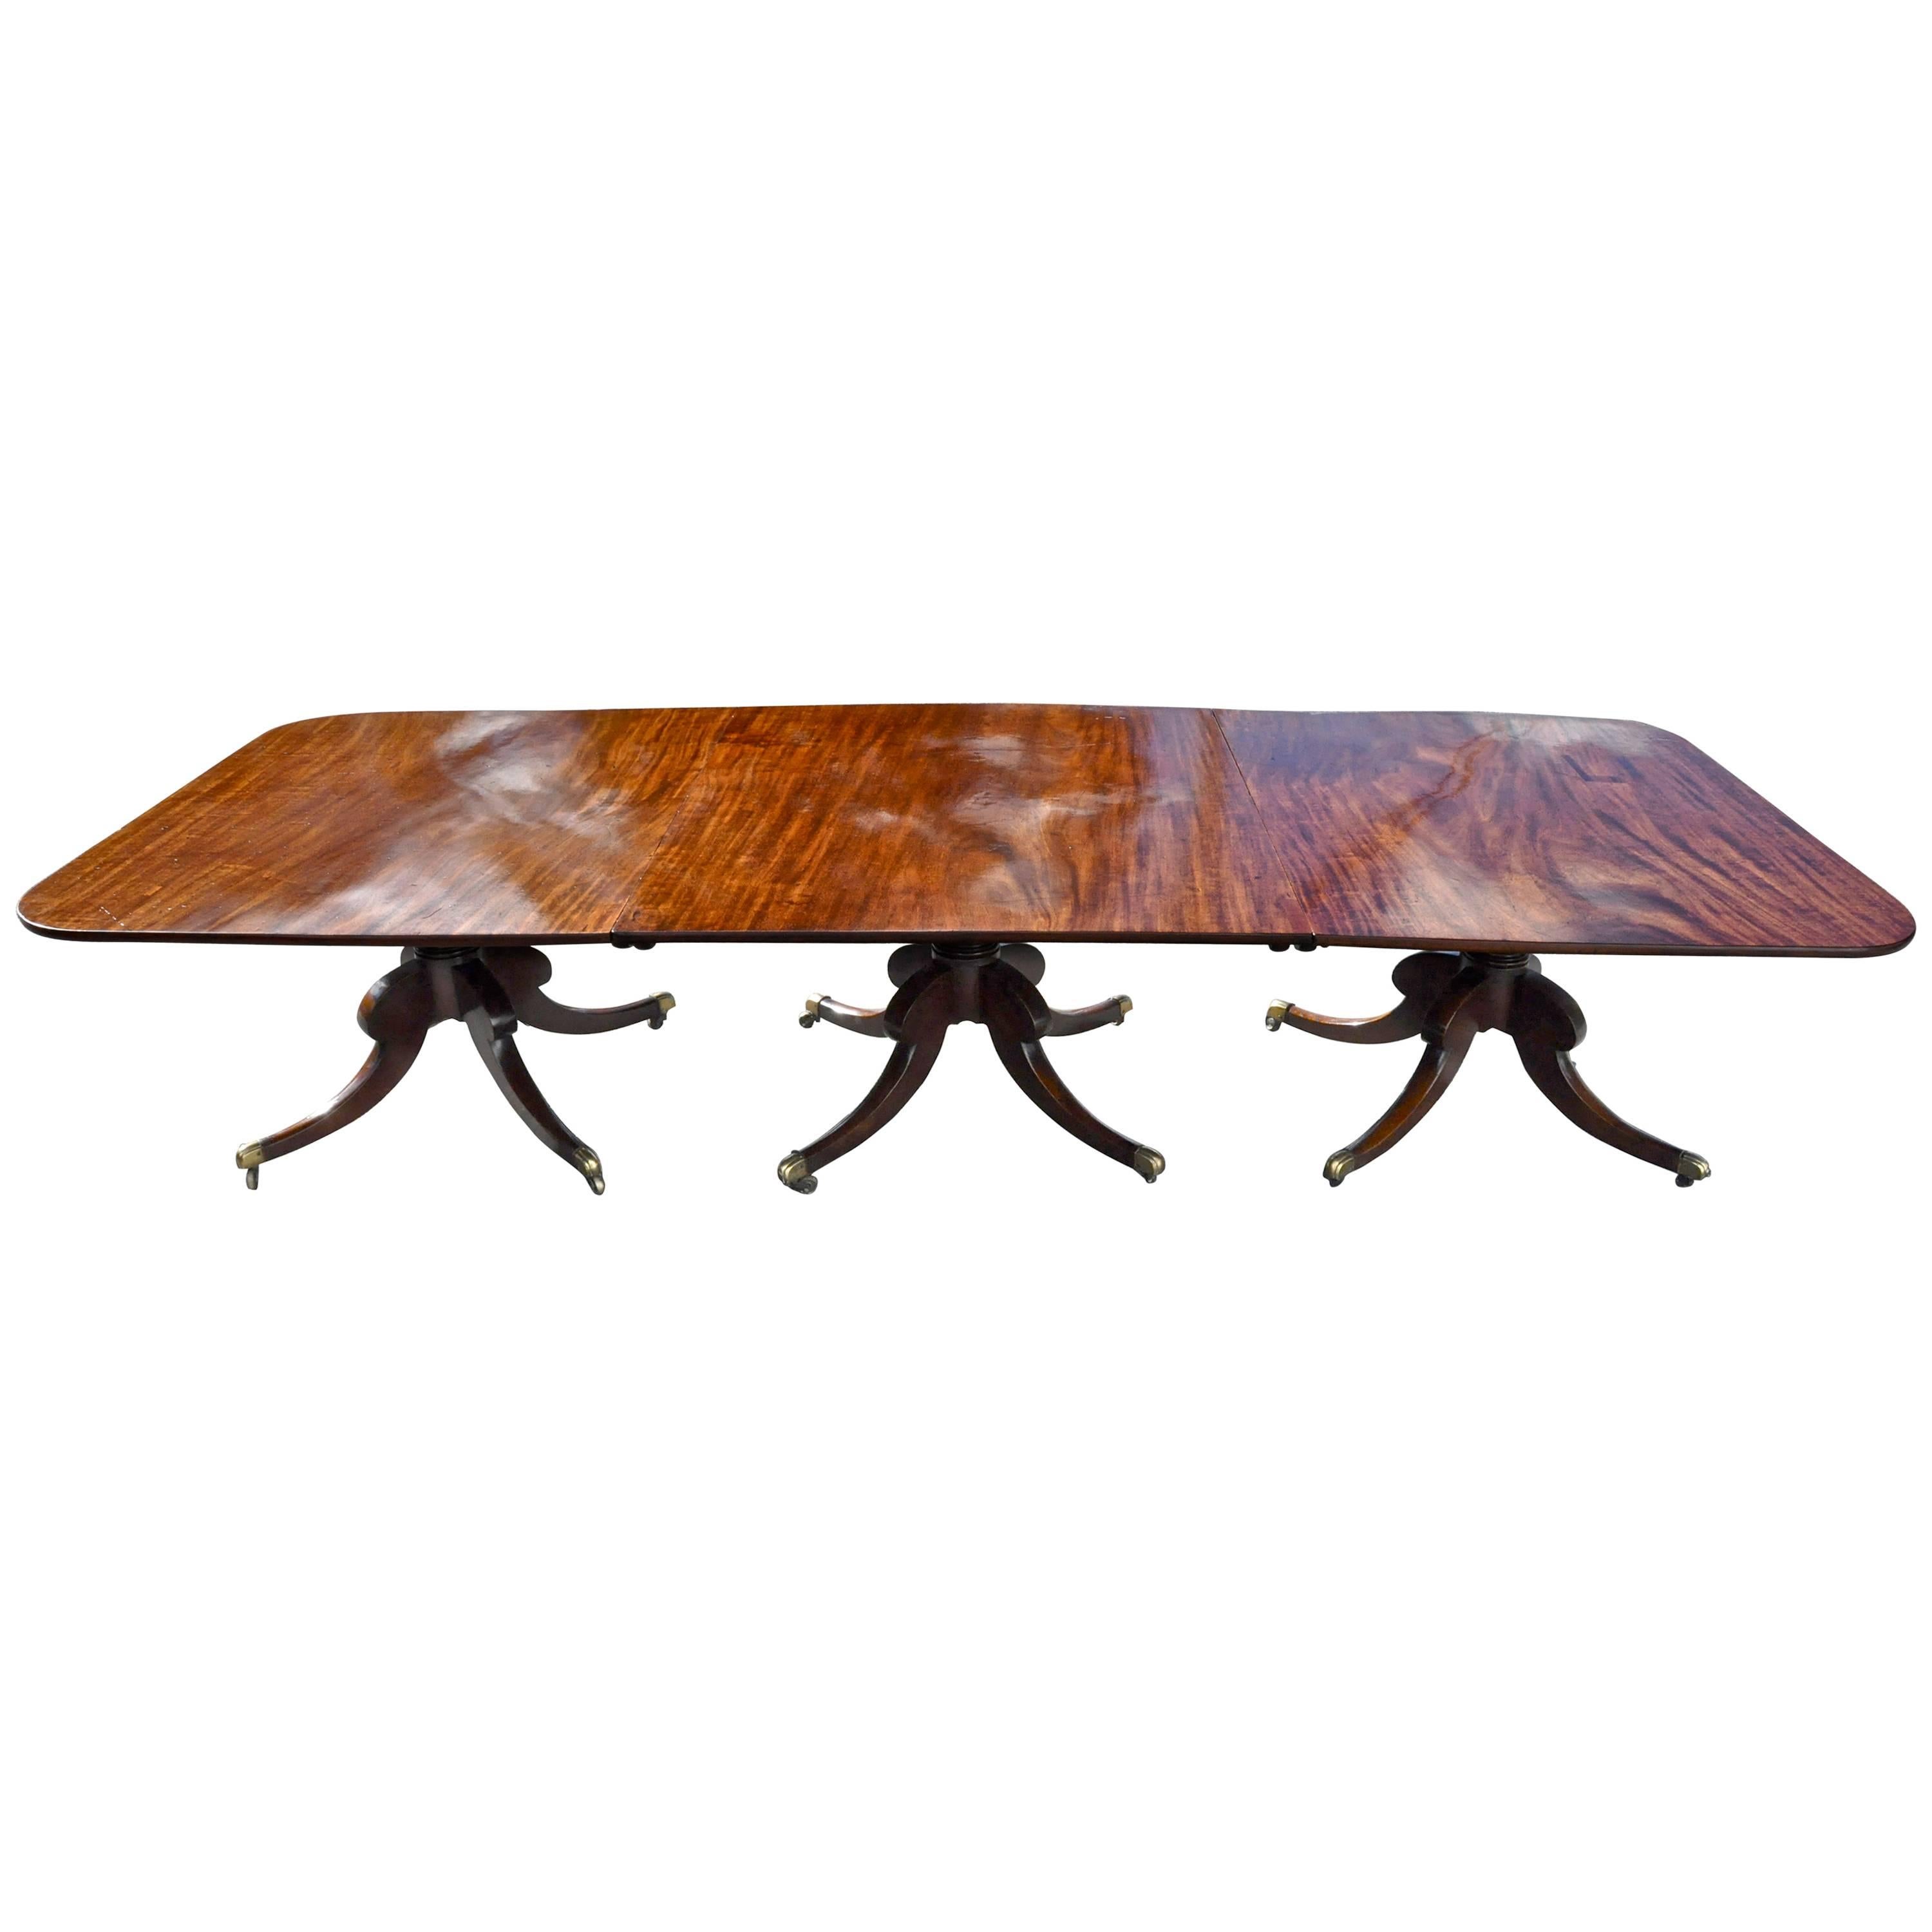 Period three pedestal regency mahogany dining table. 

Three pedestal dining table in three sections. All original and one board top sections. Well figured cuban mahogany. Original pedestals to bases and original hardware. Good early finish and